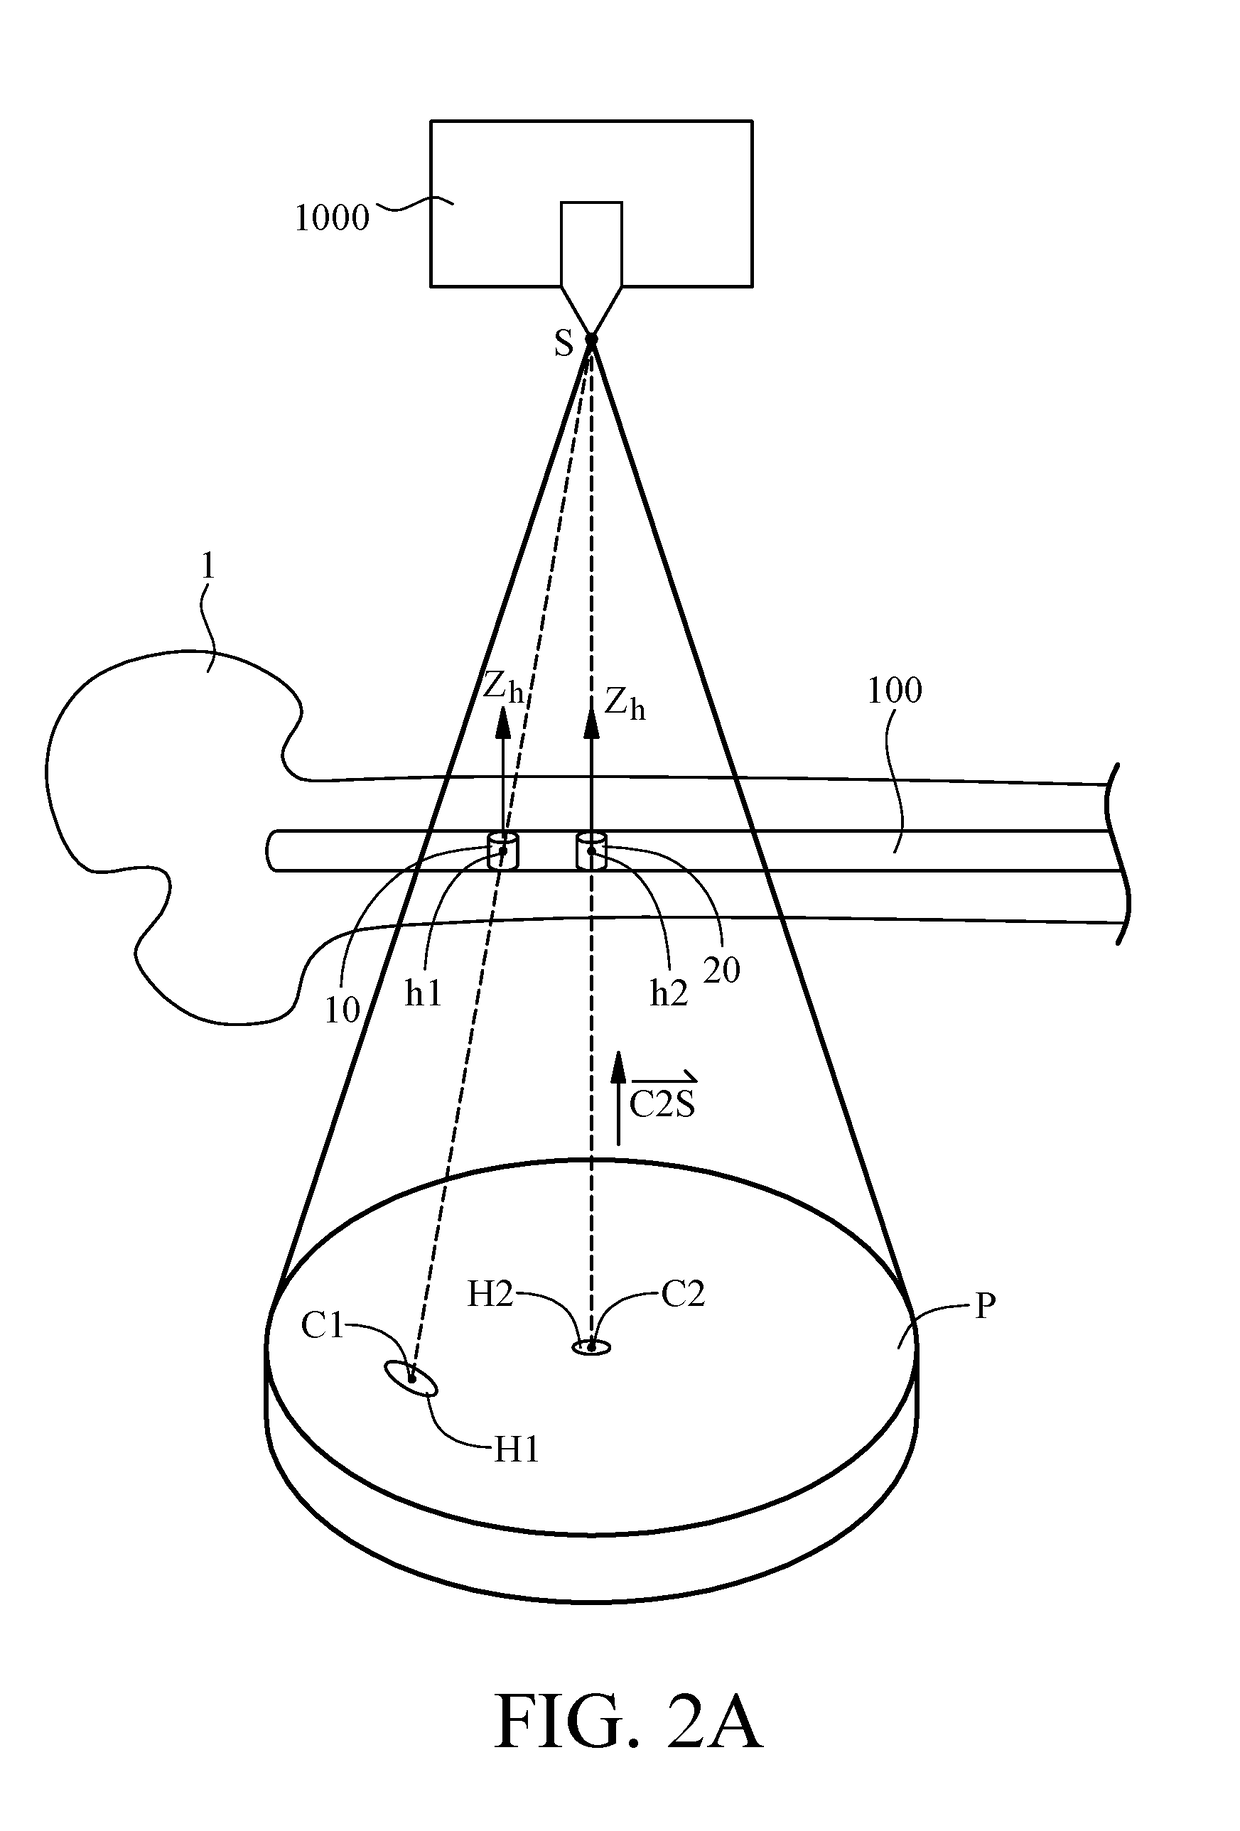 Method of locating center position and axial direction of distal locking hole of intramedullary nail